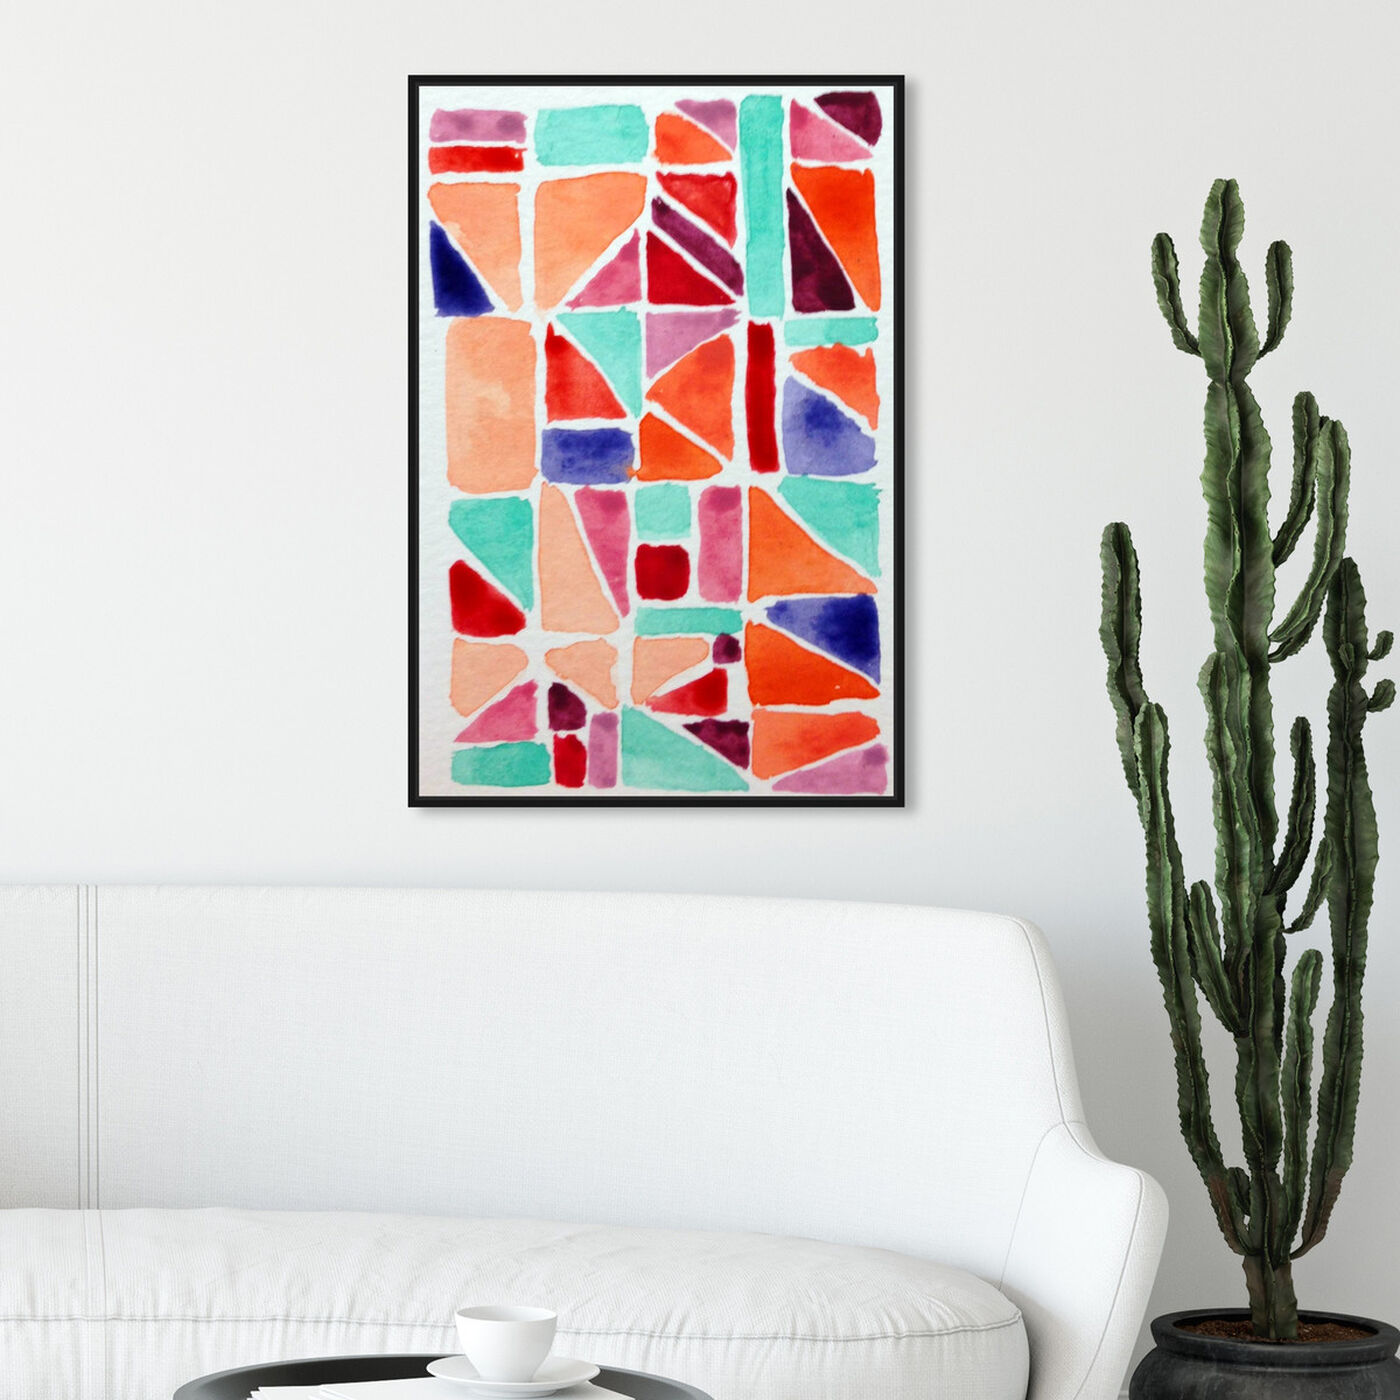 Hanging view of Small Details featuring abstract and geometric art.